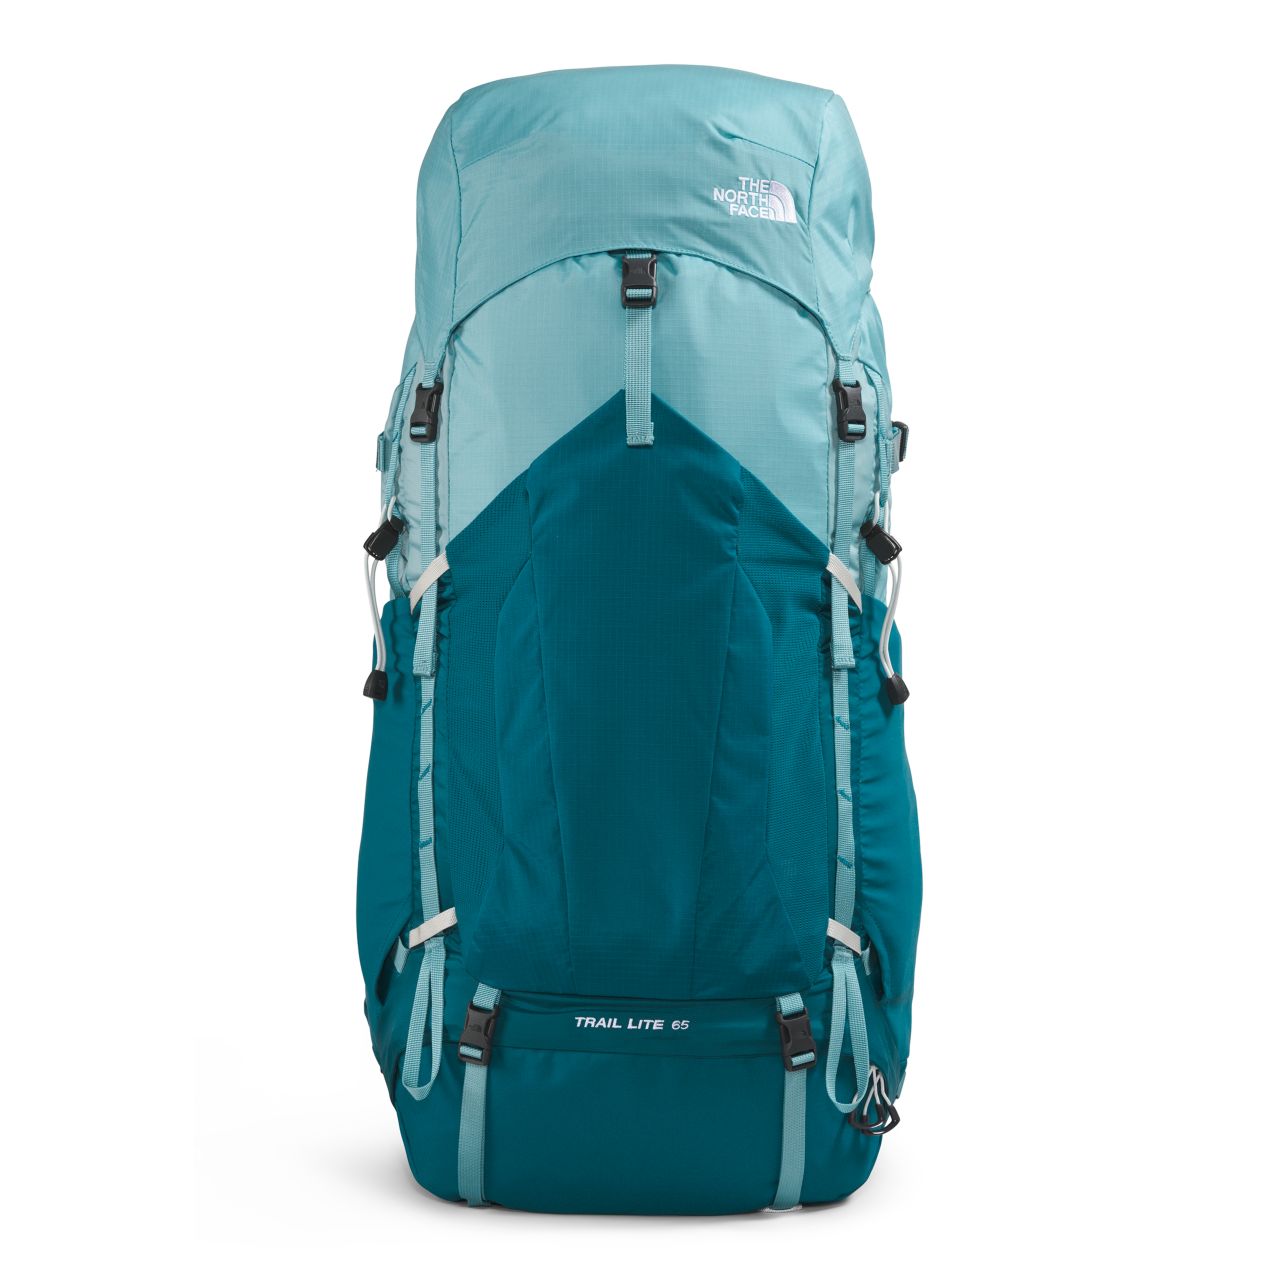 The North Face Trail Lite 65 Backpack - Women's Packs